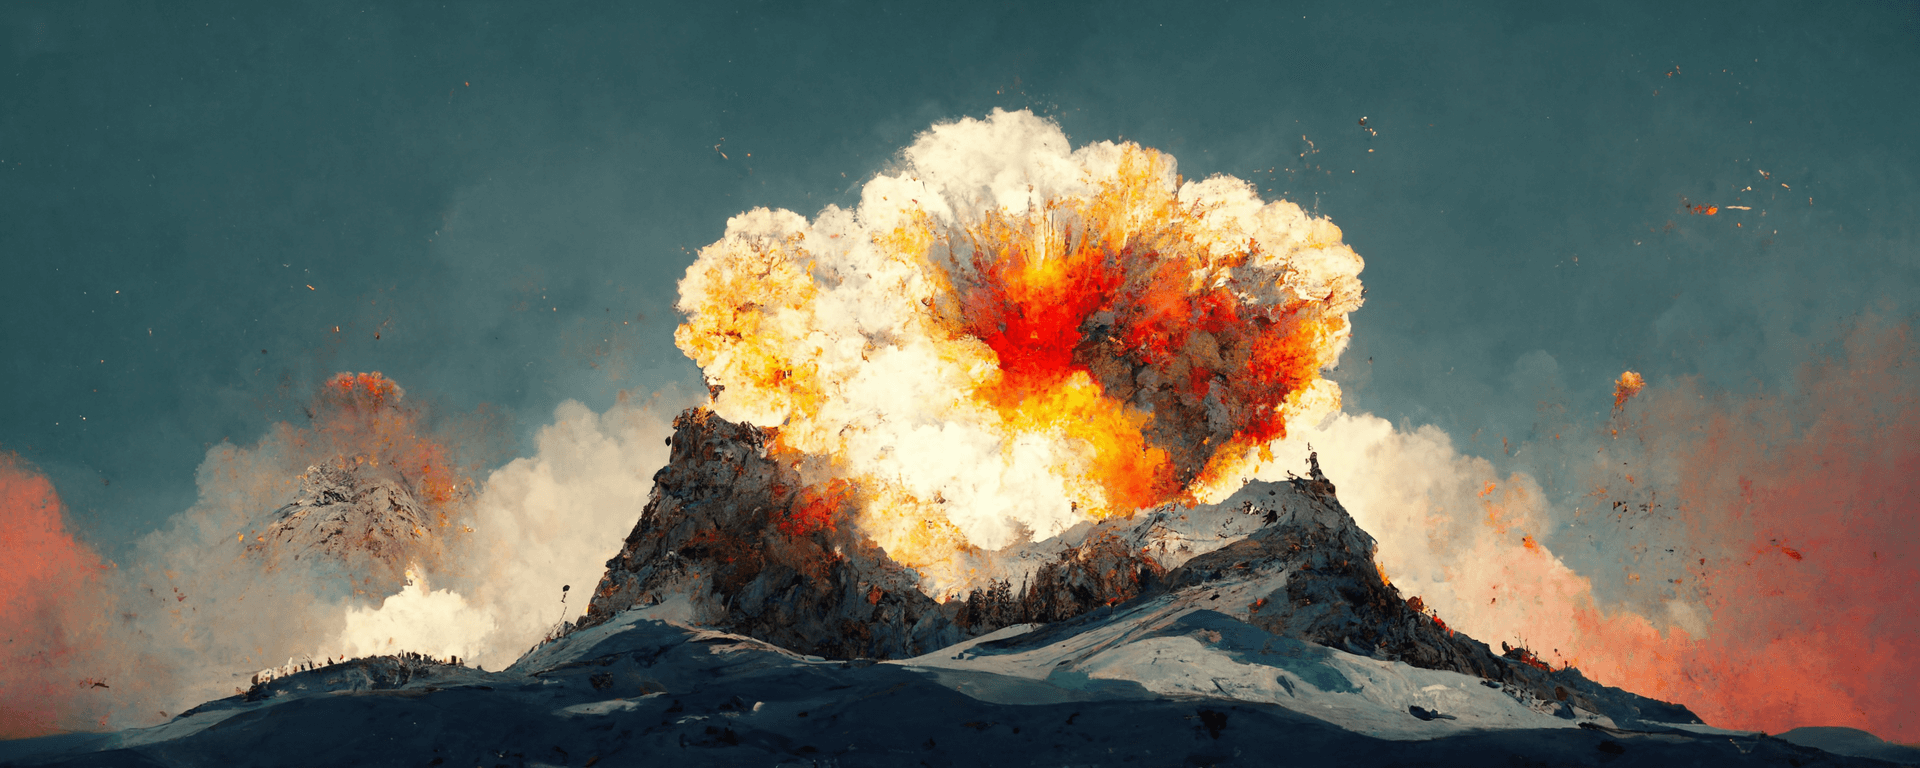 Explosion at the top of a mountain